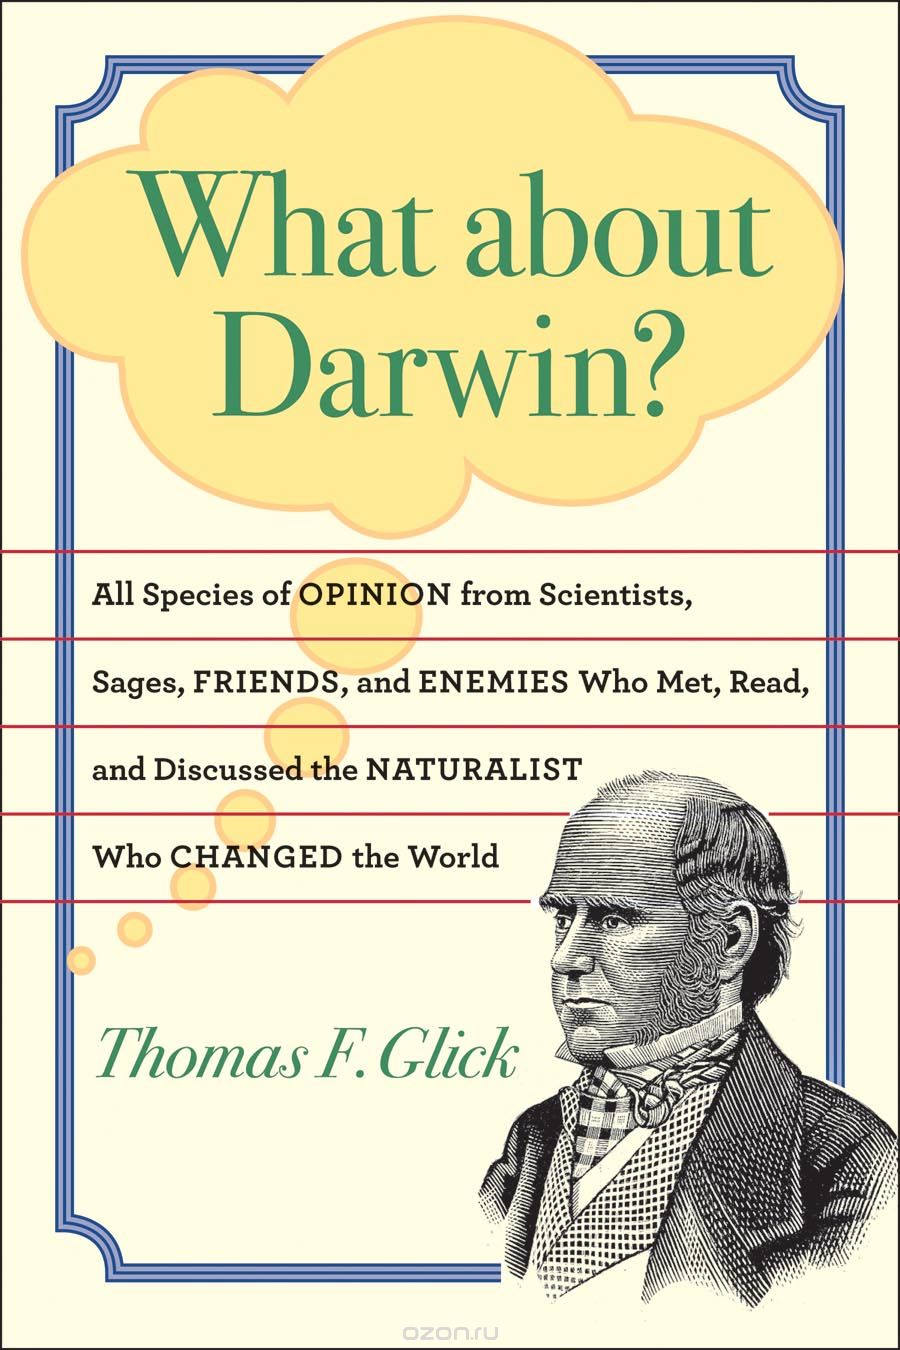 Скачать книгу "What about Darwin? – All Species of Opinion from Scientists, Sages, Friends and Enemies, Who Met, Read, and Discussed the Naturalist Who Changed"